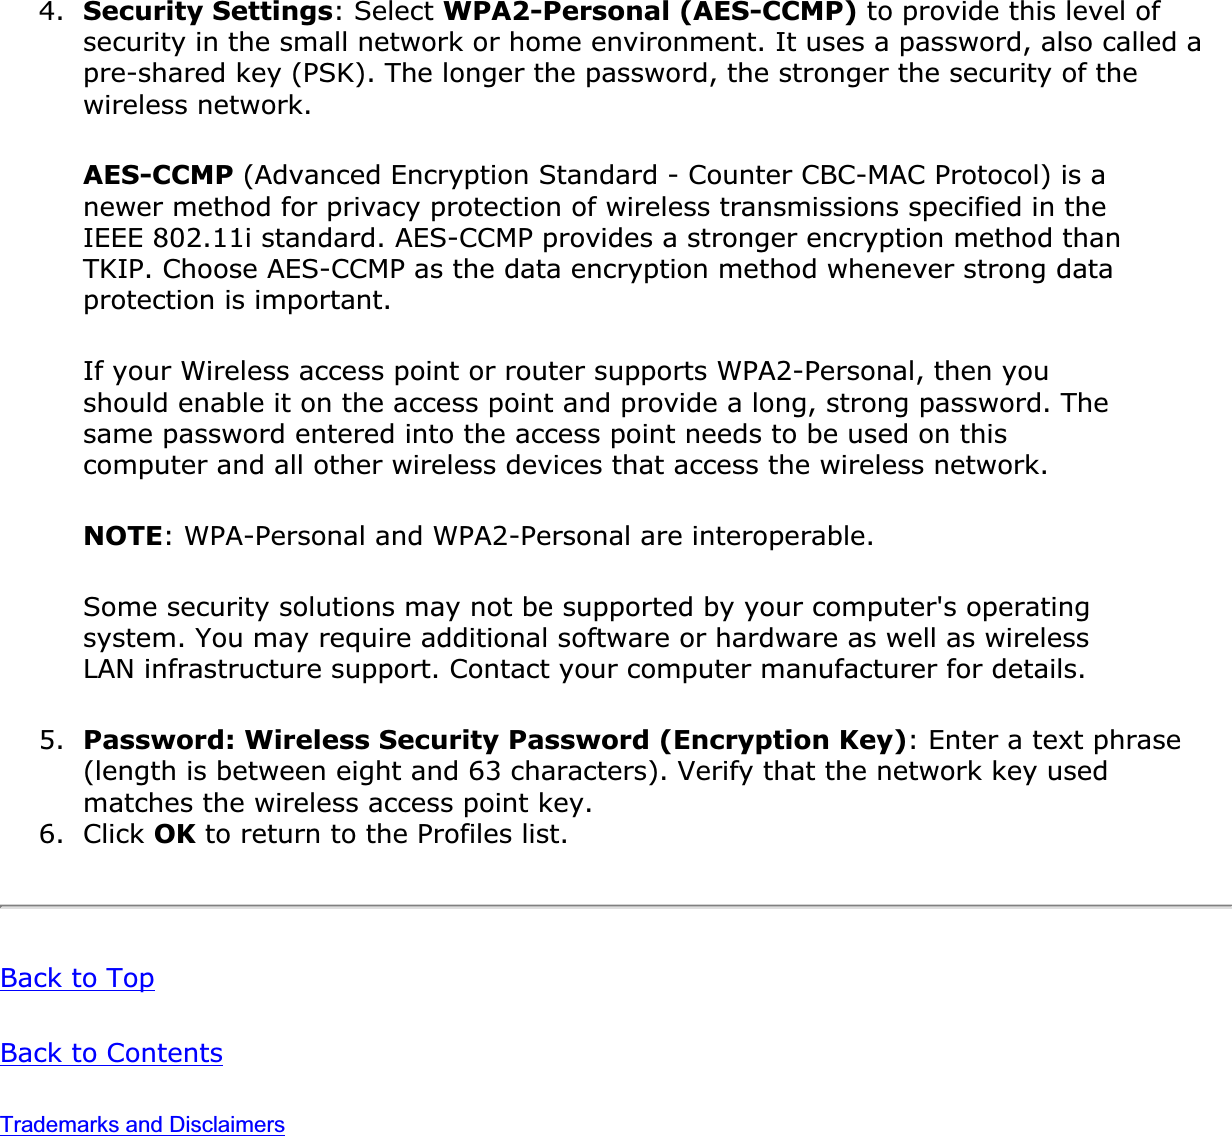 4. Security Settings: Select WPA2-Personal (AES-CCMP) to provide this level of security in the small network or home environment. It uses a password, also called a pre-shared key (PSK). The longer the password, the stronger the security of the wireless network.AES-CCMP (Advanced Encryption Standard - Counter CBC-MAC Protocol) is a newer method for privacy protection of wireless transmissions specified in the IEEE 802.11i standard. AES-CCMP provides a stronger encryption method than TKIP. Choose AES-CCMP as the data encryption method whenever strong data protection is important.If your Wireless access point or router supports WPA2-Personal, then you should enable it on the access point and provide a long, strong password. The same password entered into the access point needs to be used on this computer and all other wireless devices that access the wireless network.NOTE: WPA-Personal and WPA2-Personal are interoperable.Some security solutions may not be supported by your computer&apos;s operating system. You may require additional software or hardware as well as wireless LAN infrastructure support. Contact your computer manufacturer for details.5. Password: Wireless Security Password (Encryption Key): Enter a text phrase (length is between eight and 63 characters). Verify that the network key used matches the wireless access point key.6. Click OK to return to the Profiles list.Back to TopBack to ContentsTrademarks and Disclaimers